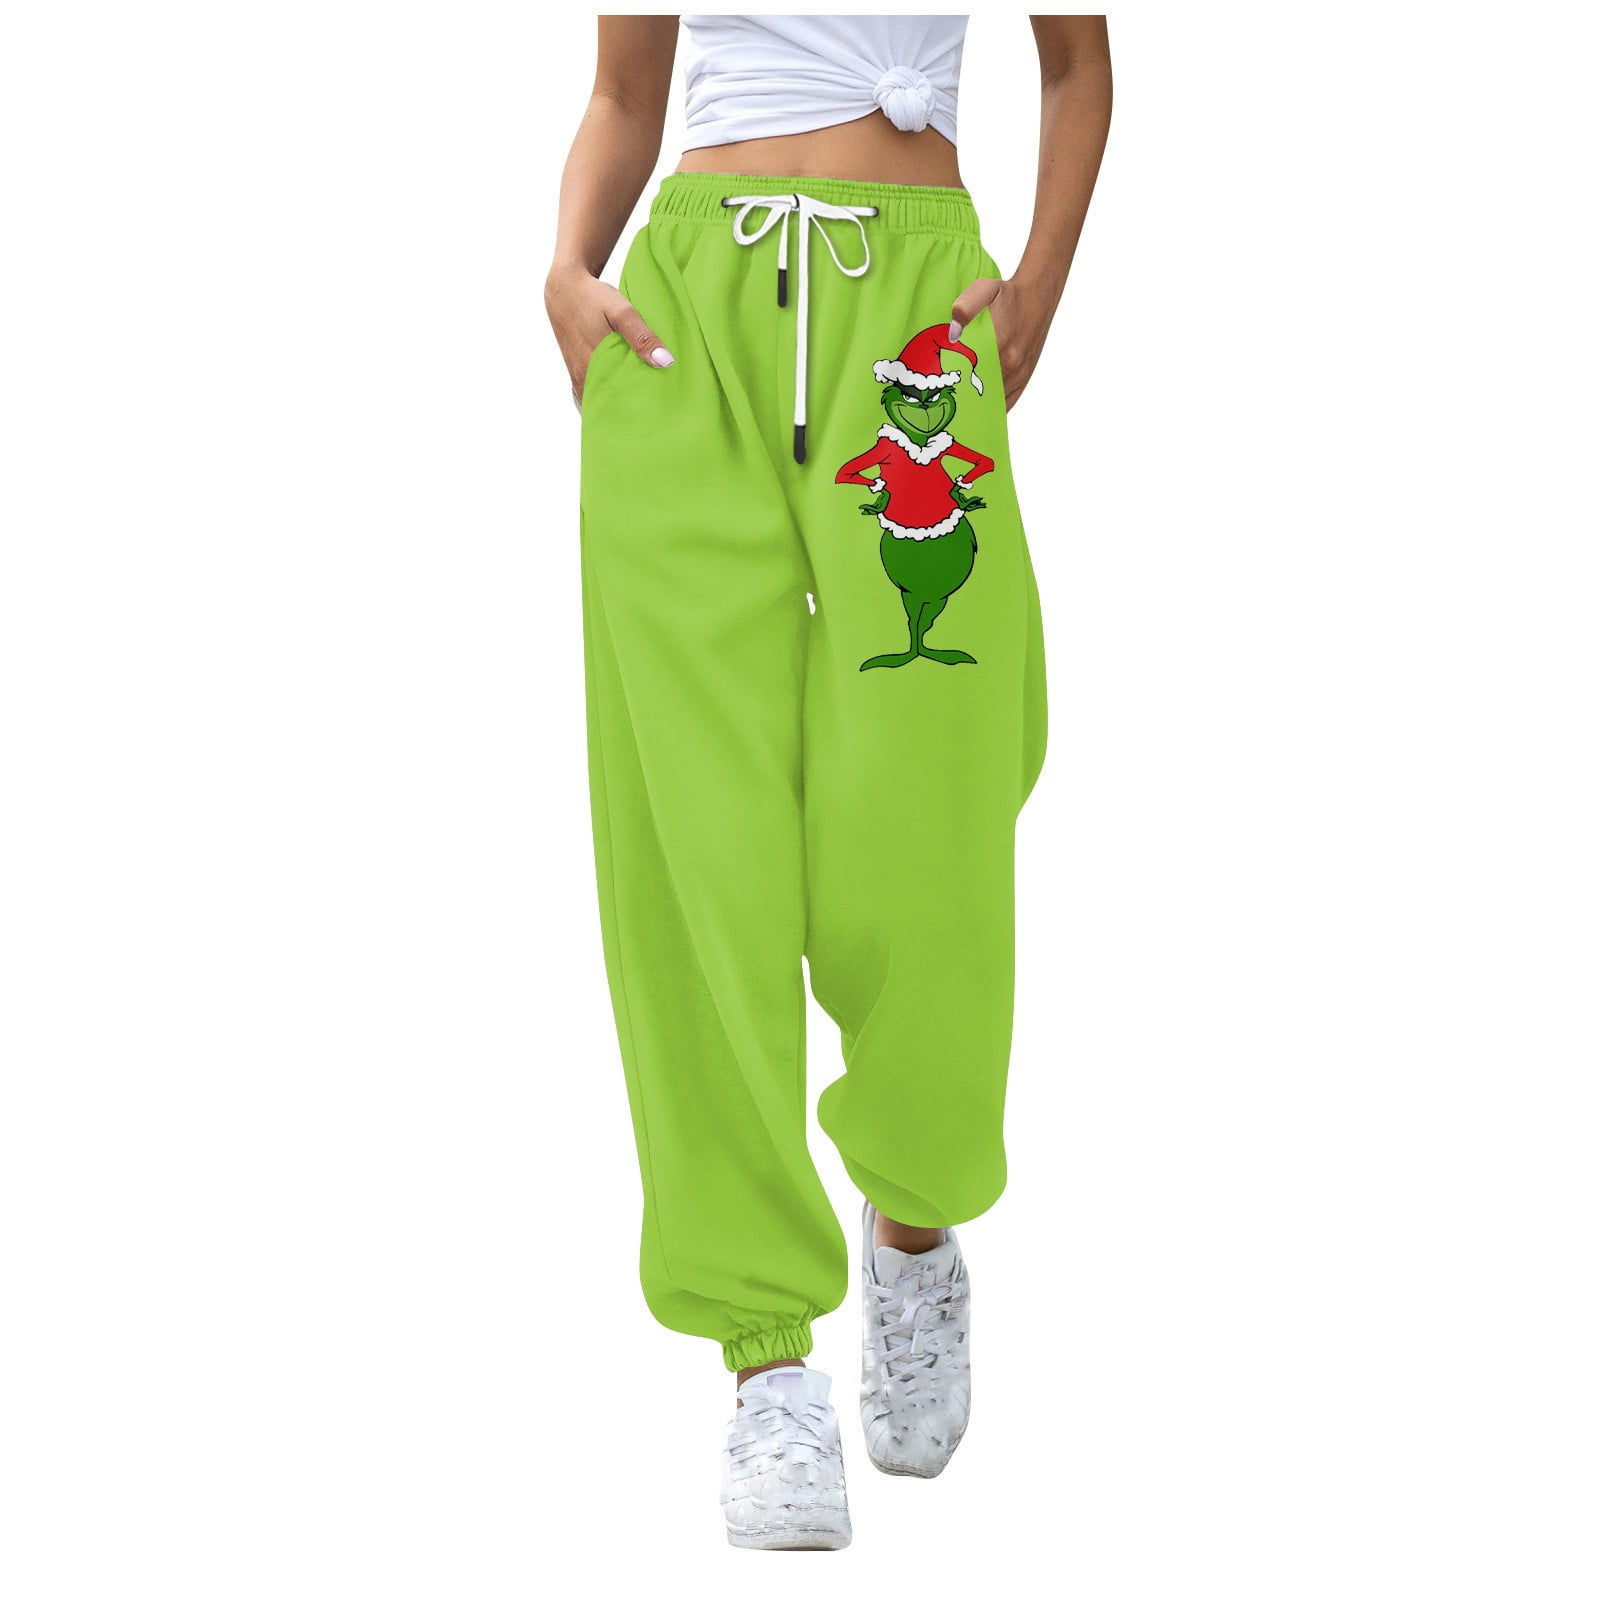 Up to 50% Off! Grinch Sweatpants Christmas Sweatpants How Grinch Stole ...